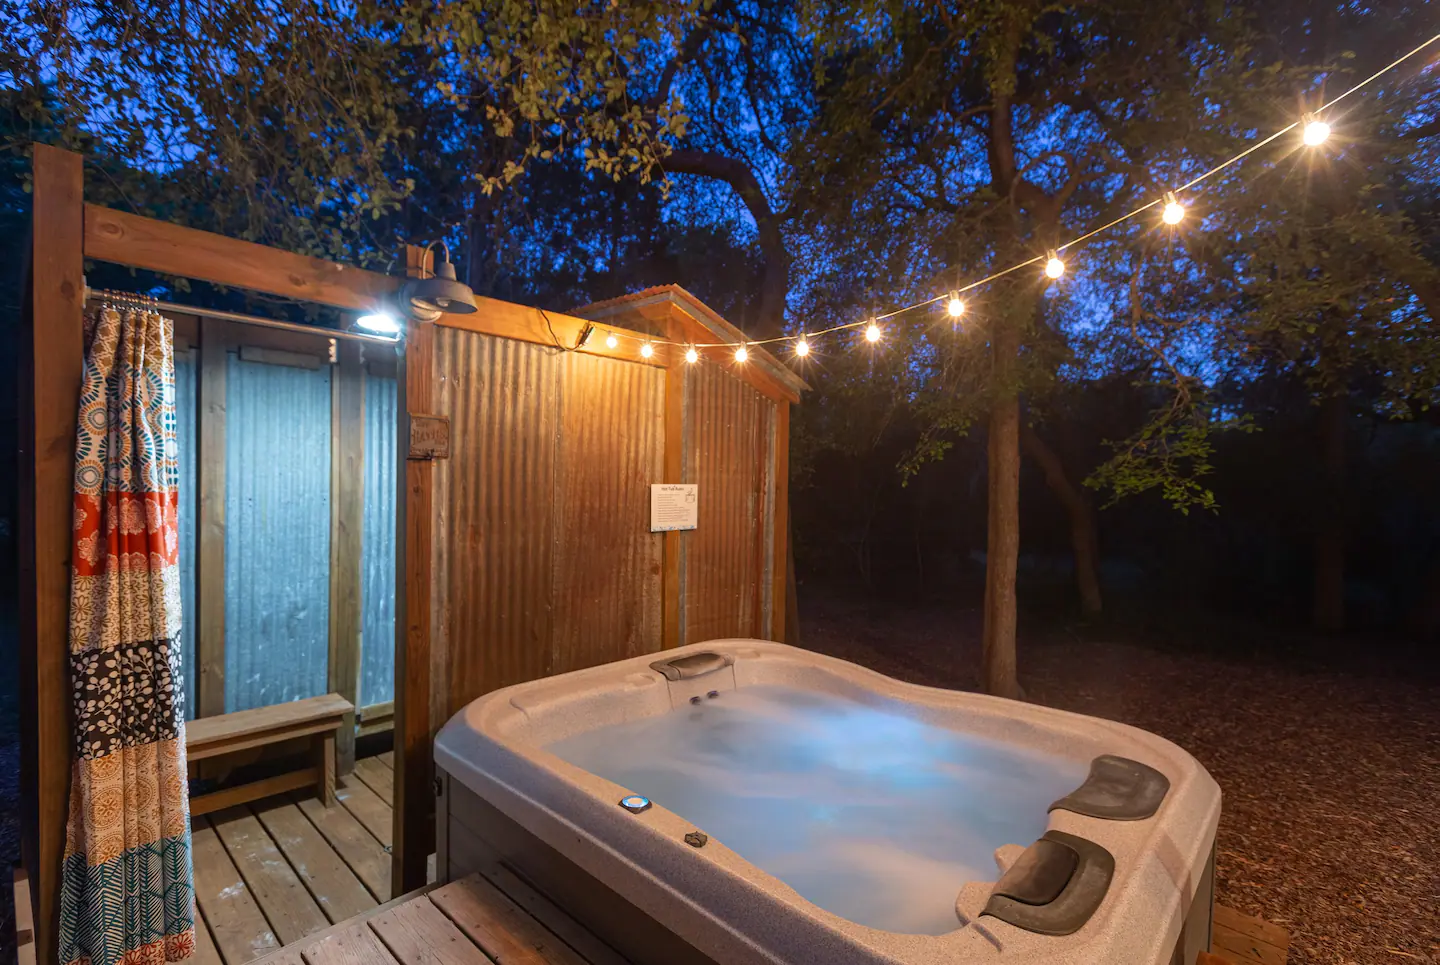 Next to the hot tub is an outdoor shower.